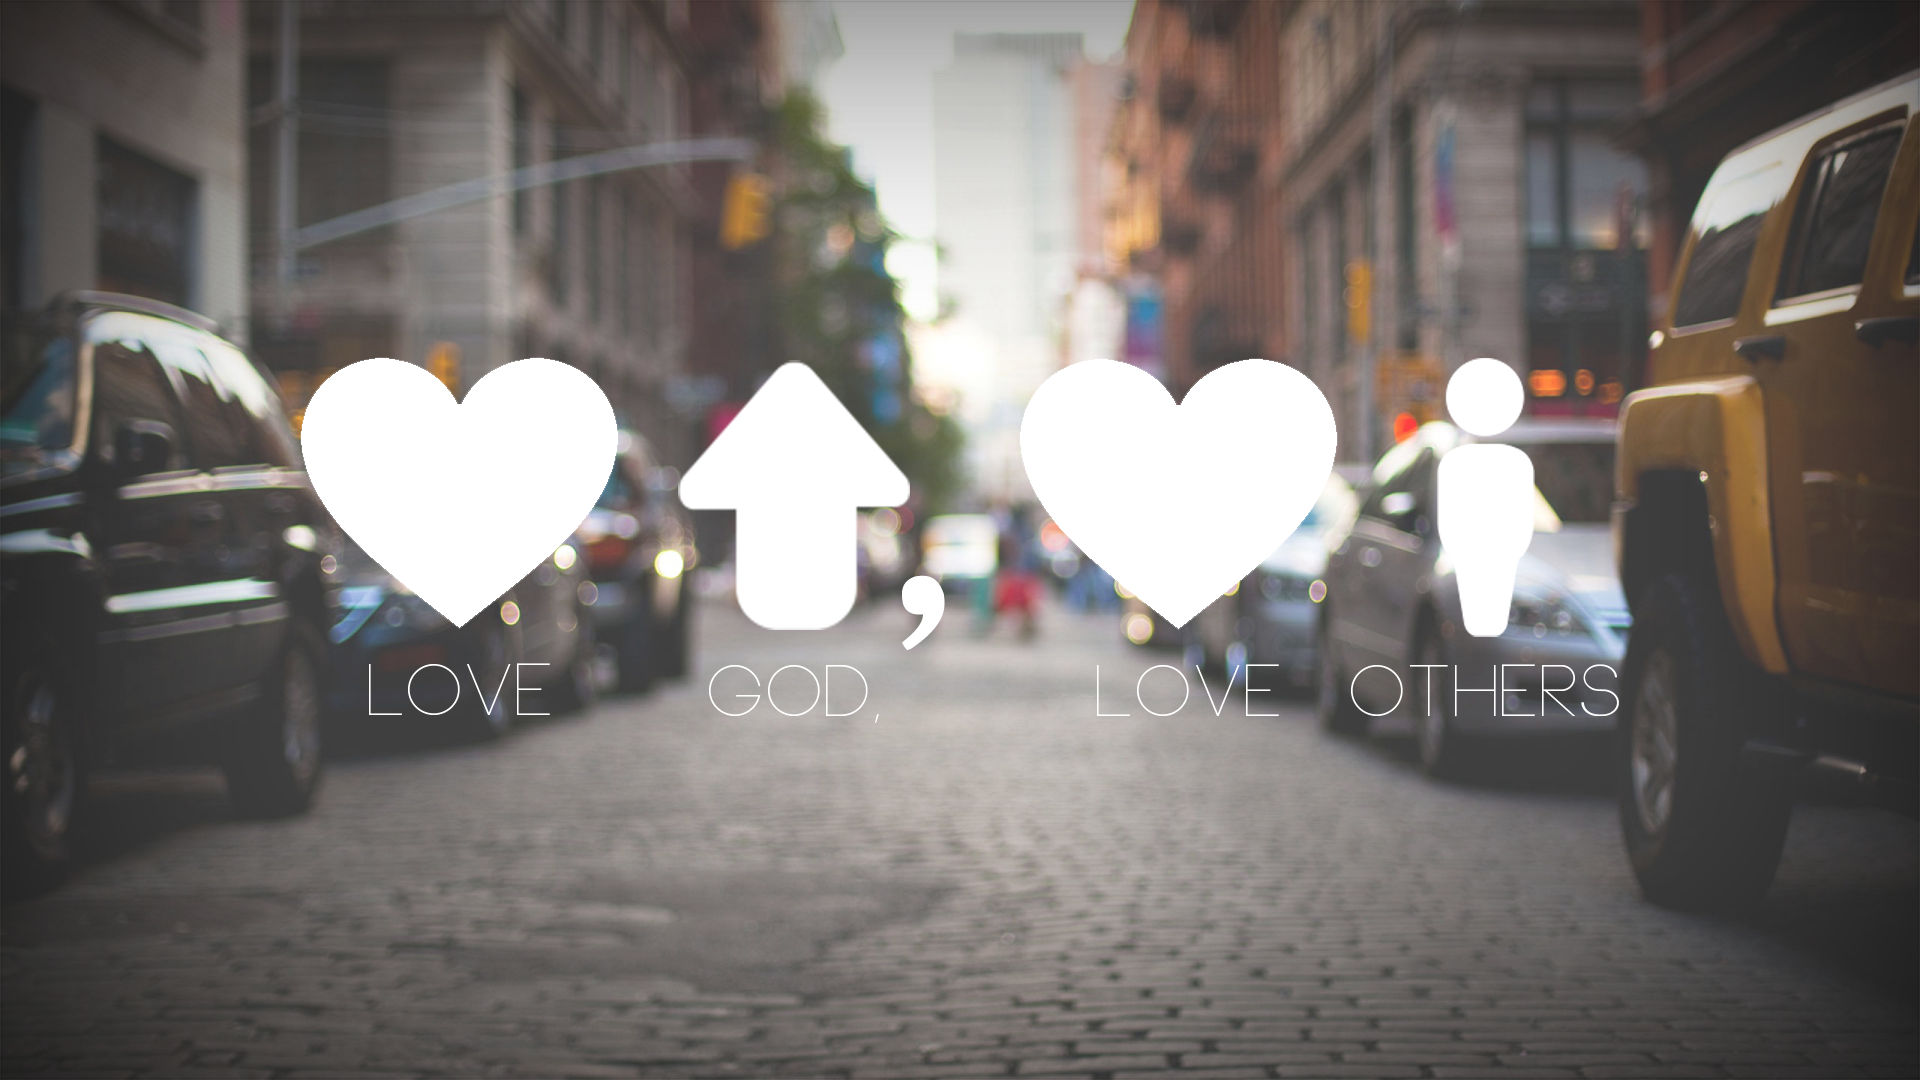 Love-God-Love-Others